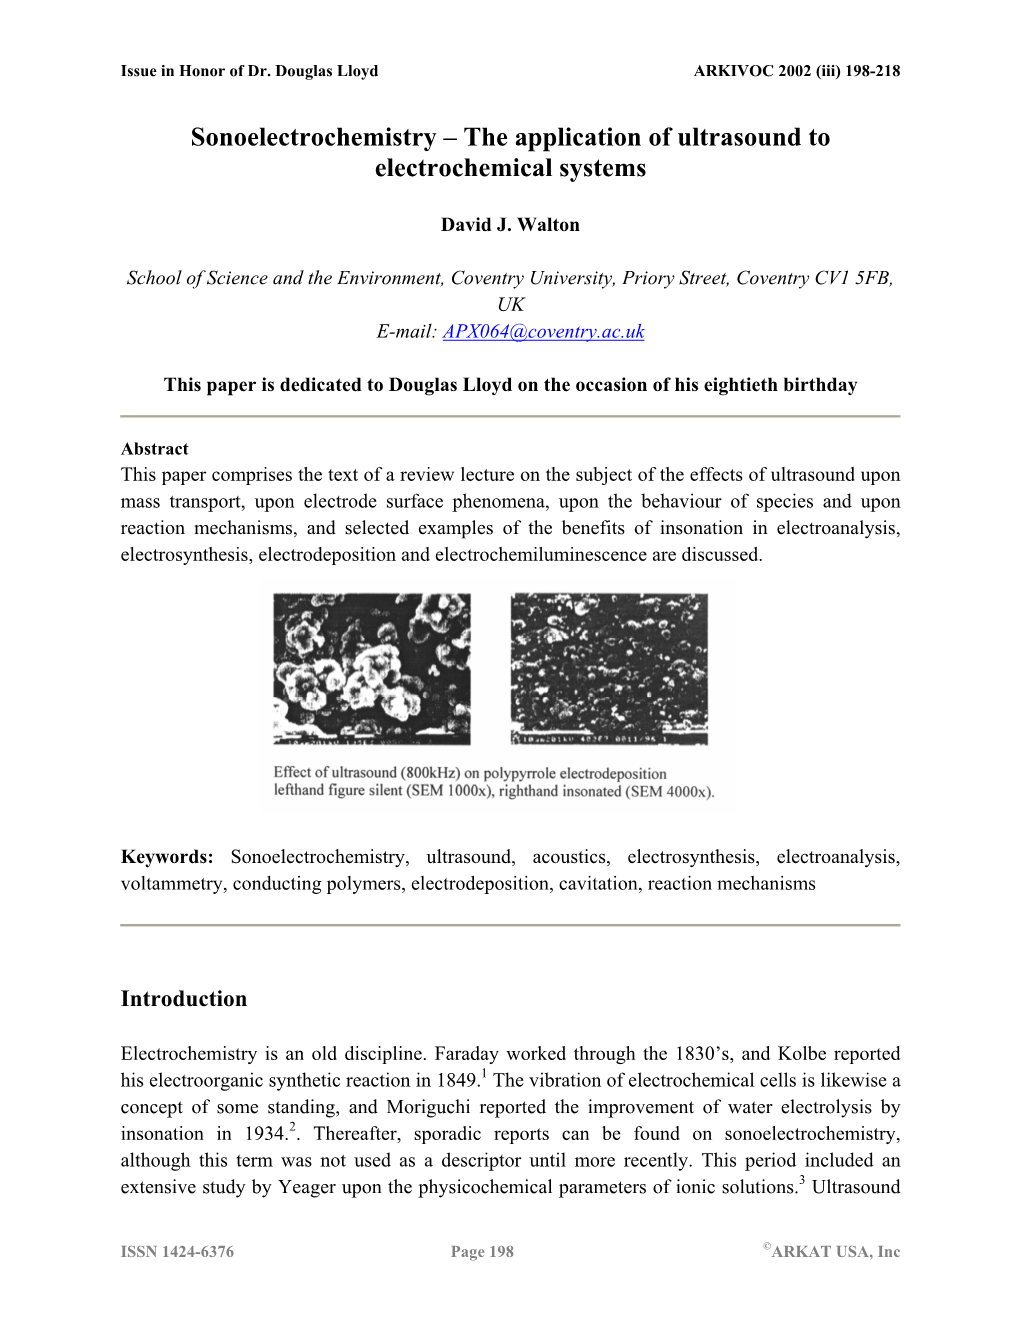 Sonoelectrochemistry – the Application of Ultrasound to Electrochemical Systems